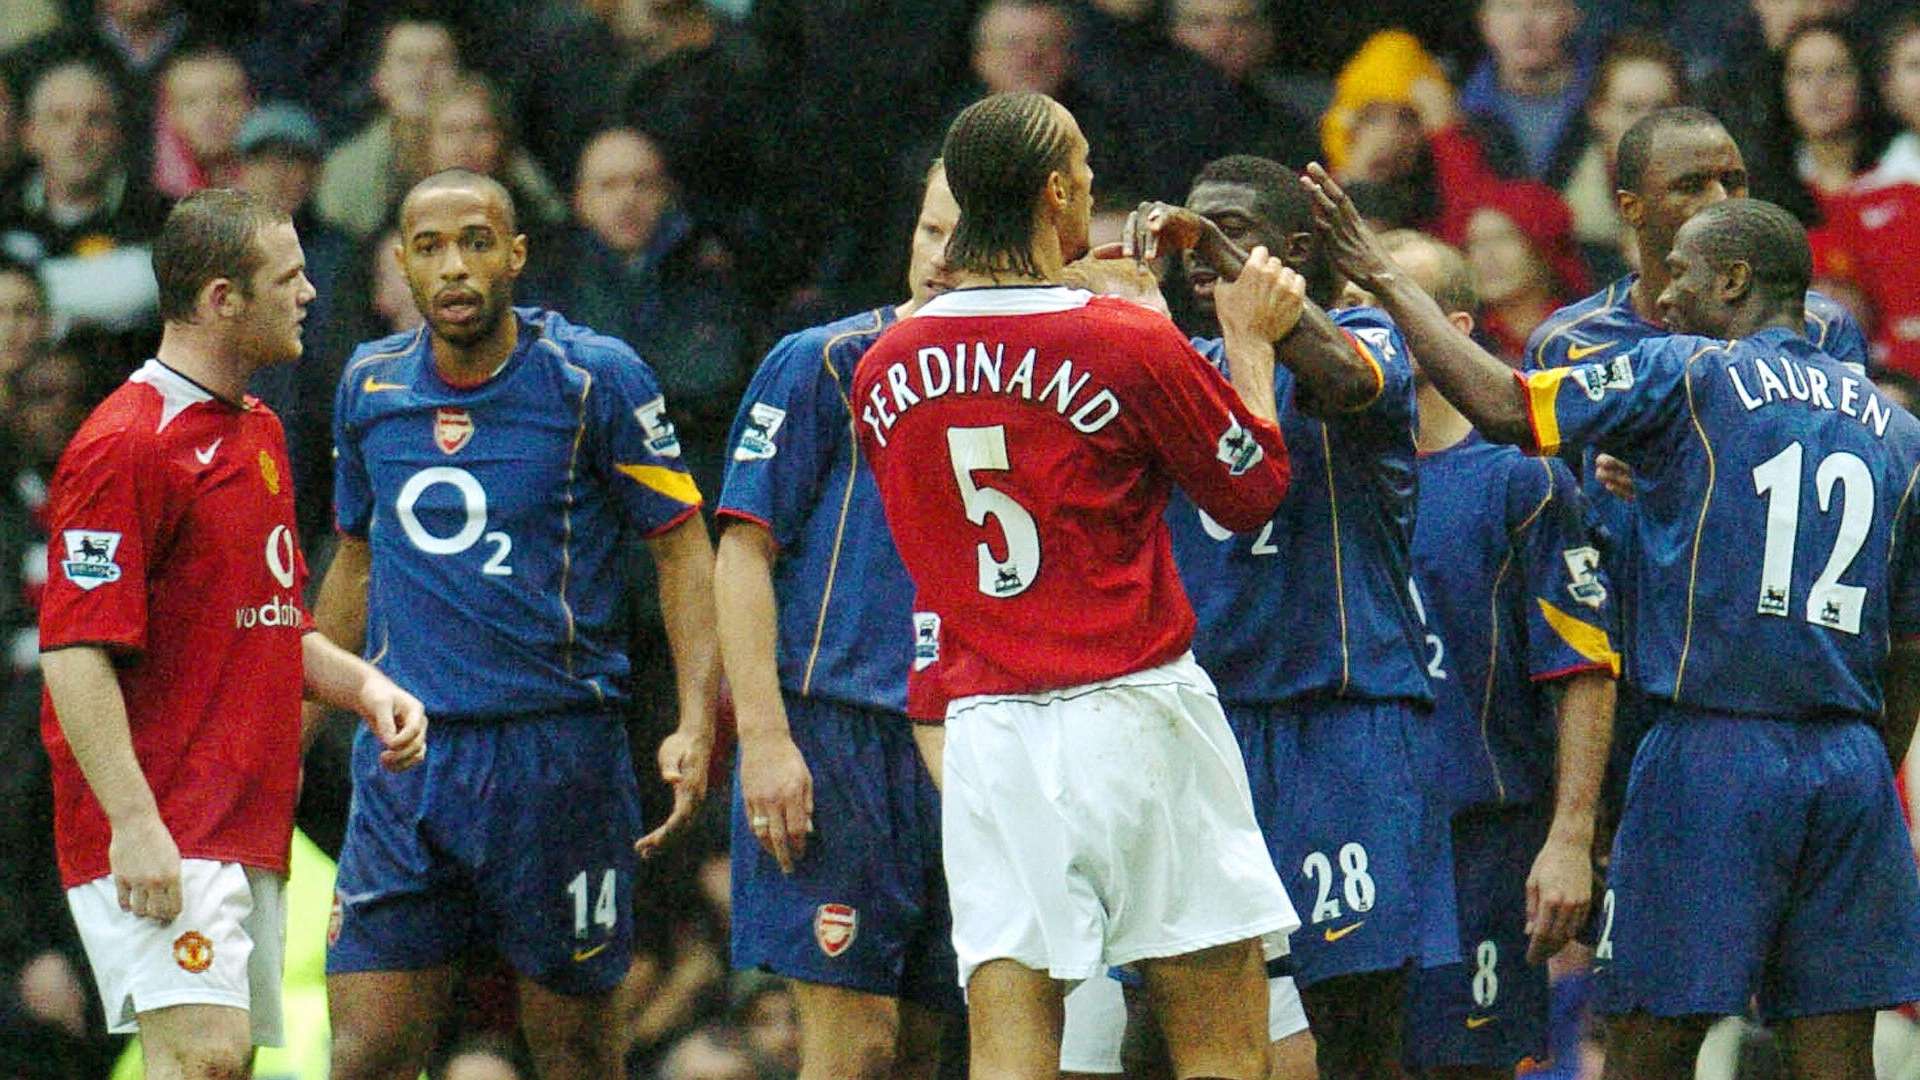 Manchester United Arsenal 2004 'Pizzagate'